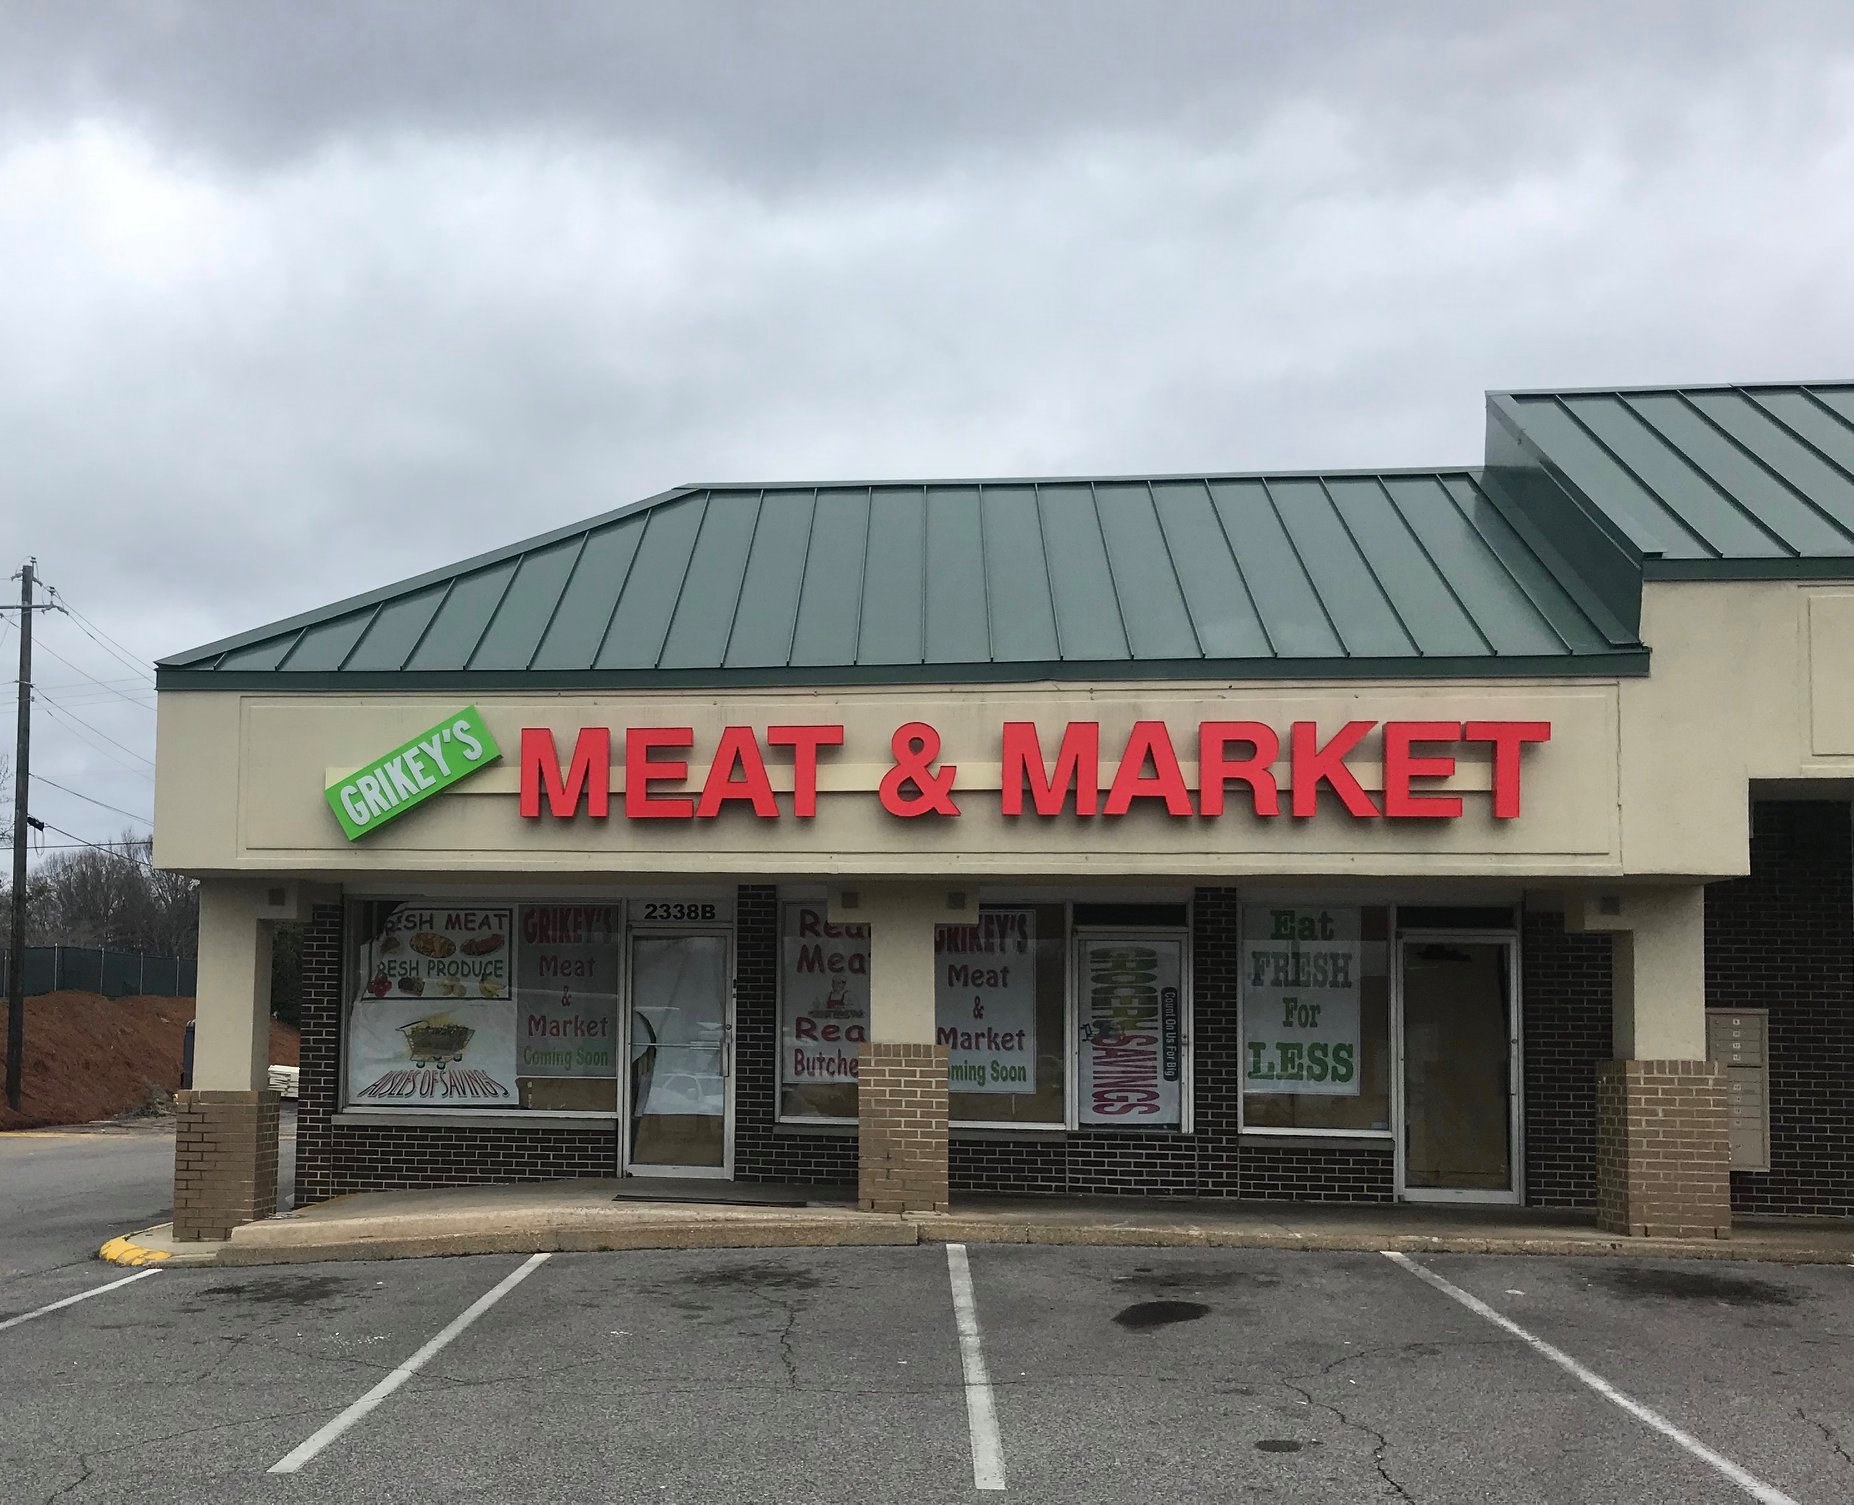 Grikey's Meat and Market in Center Point plans to open soon, will offer 'Real Meat, Real Butchers'